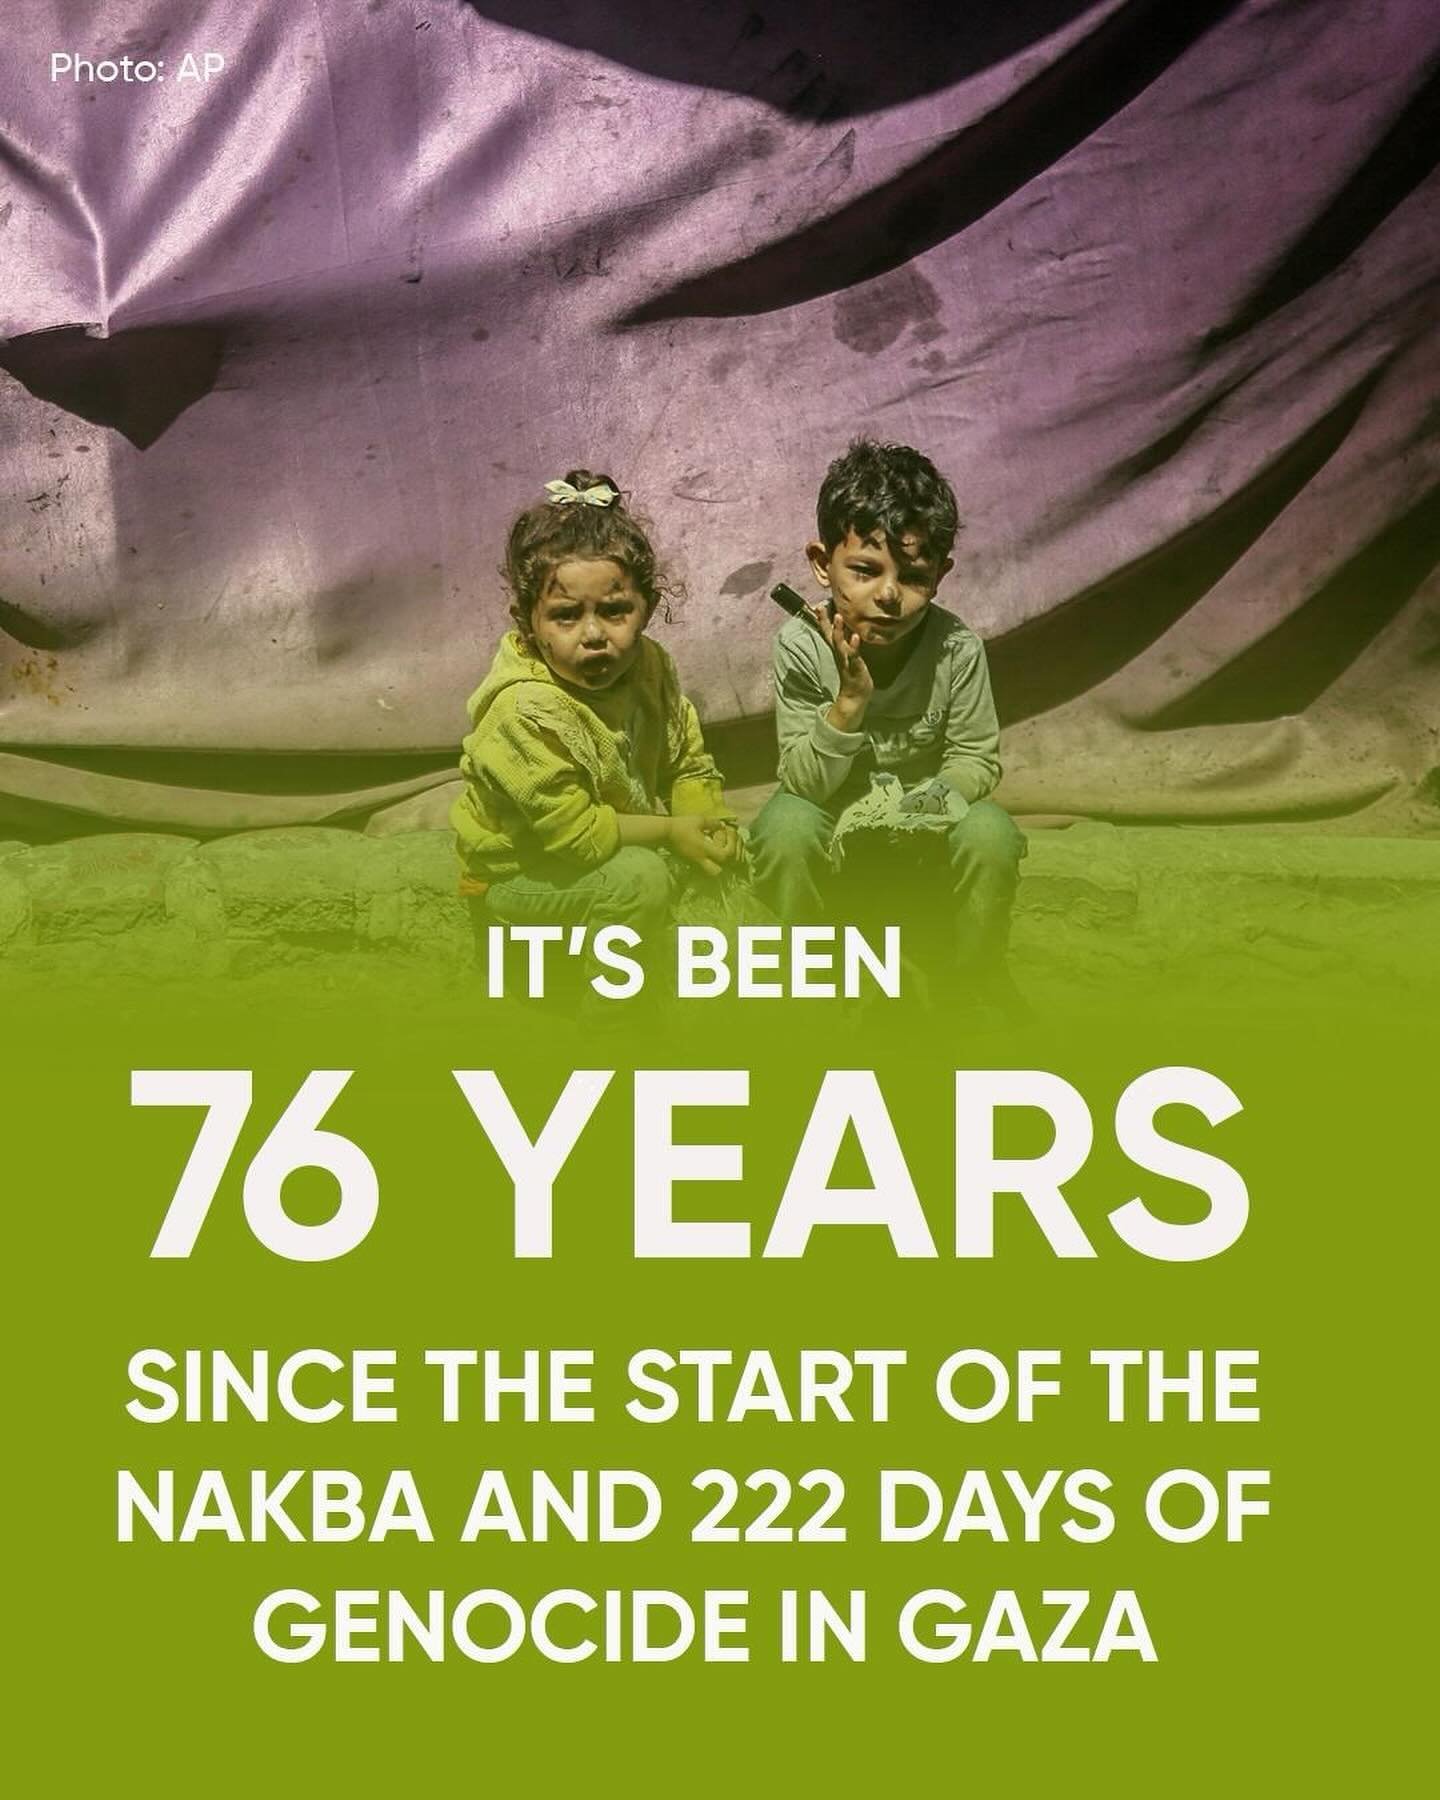 It&rsquo;s been 76 years since the beginning of the Nakba and 222 days of genocide in Gaza.  These atrocities are made possible by our tax dollars. 

Our government bears responsibility for what&rsquo;s happening - and our leaders have the power to s